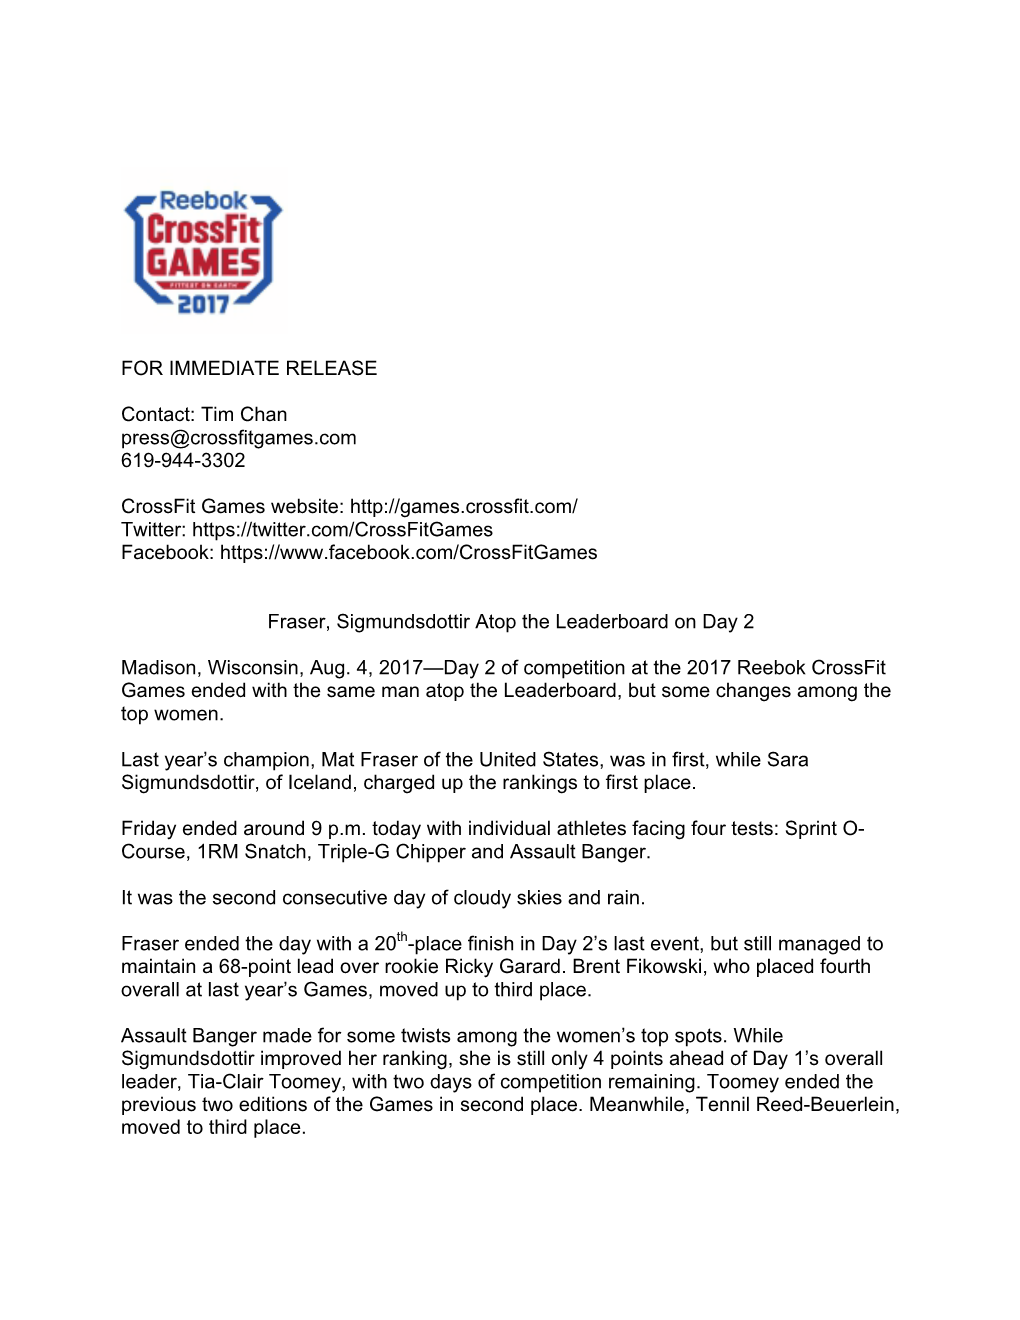 FOR IMMEDIATE RELEASE Contact: Tim Chan Press@Crossfitgames